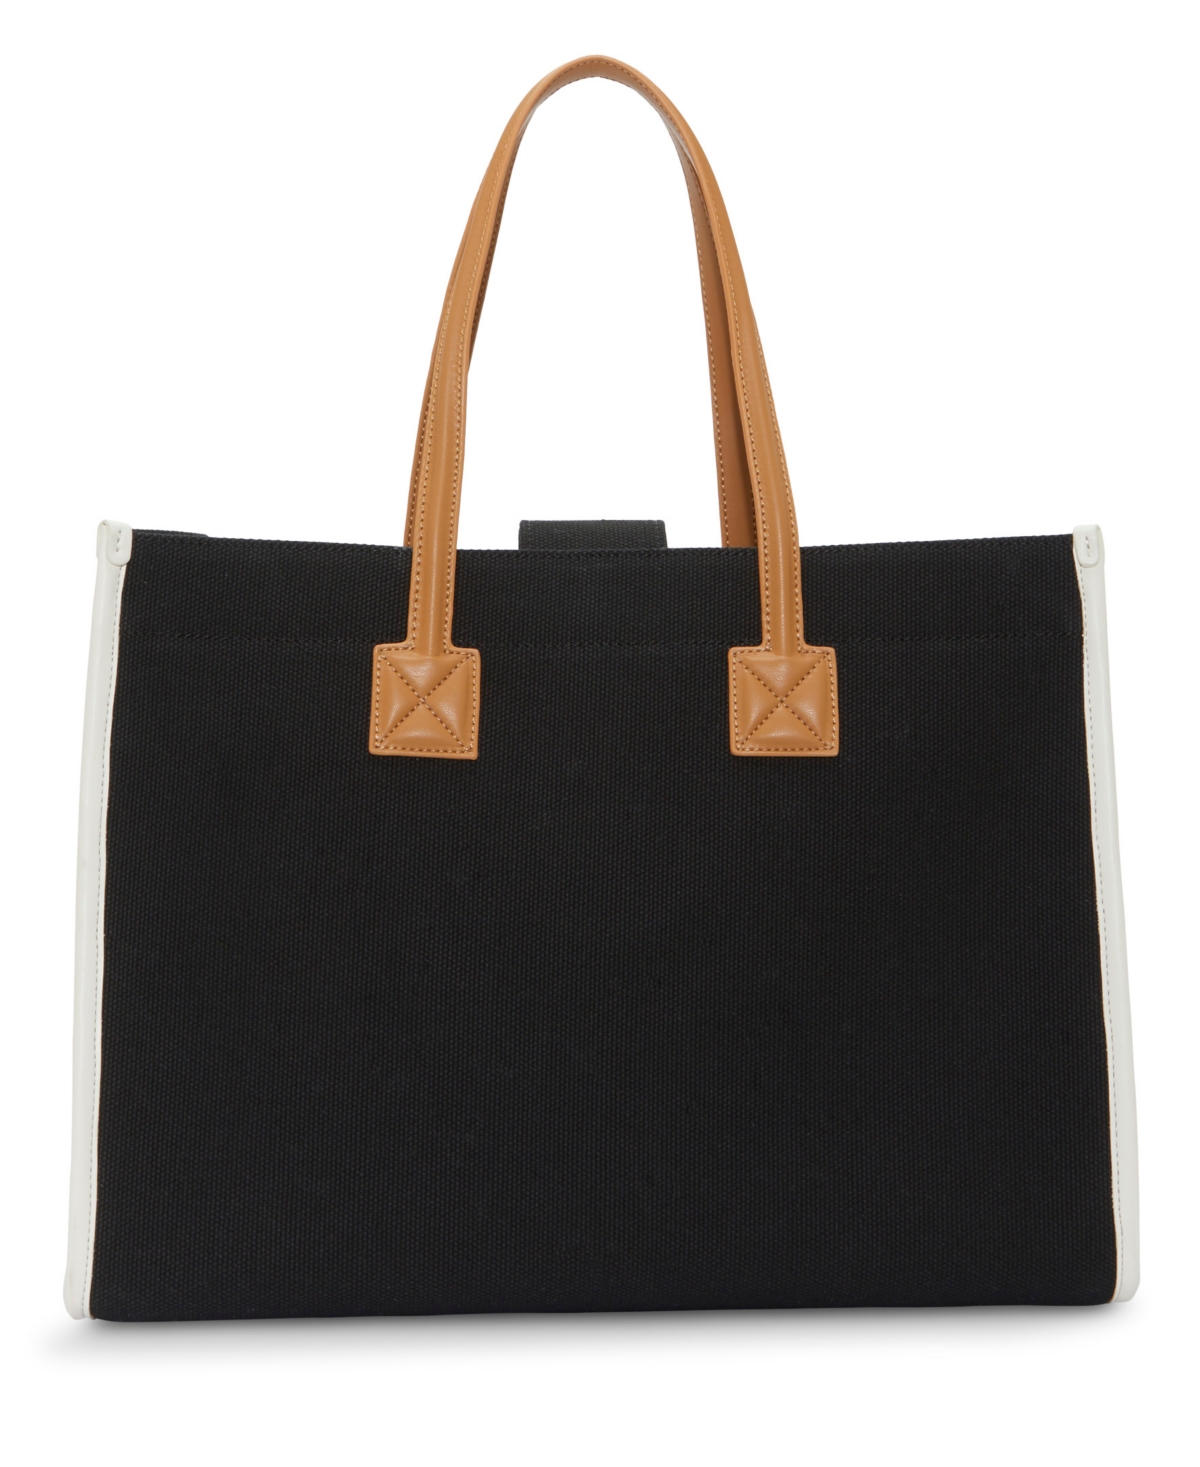 VINCE CAMUTO SALY TOTE